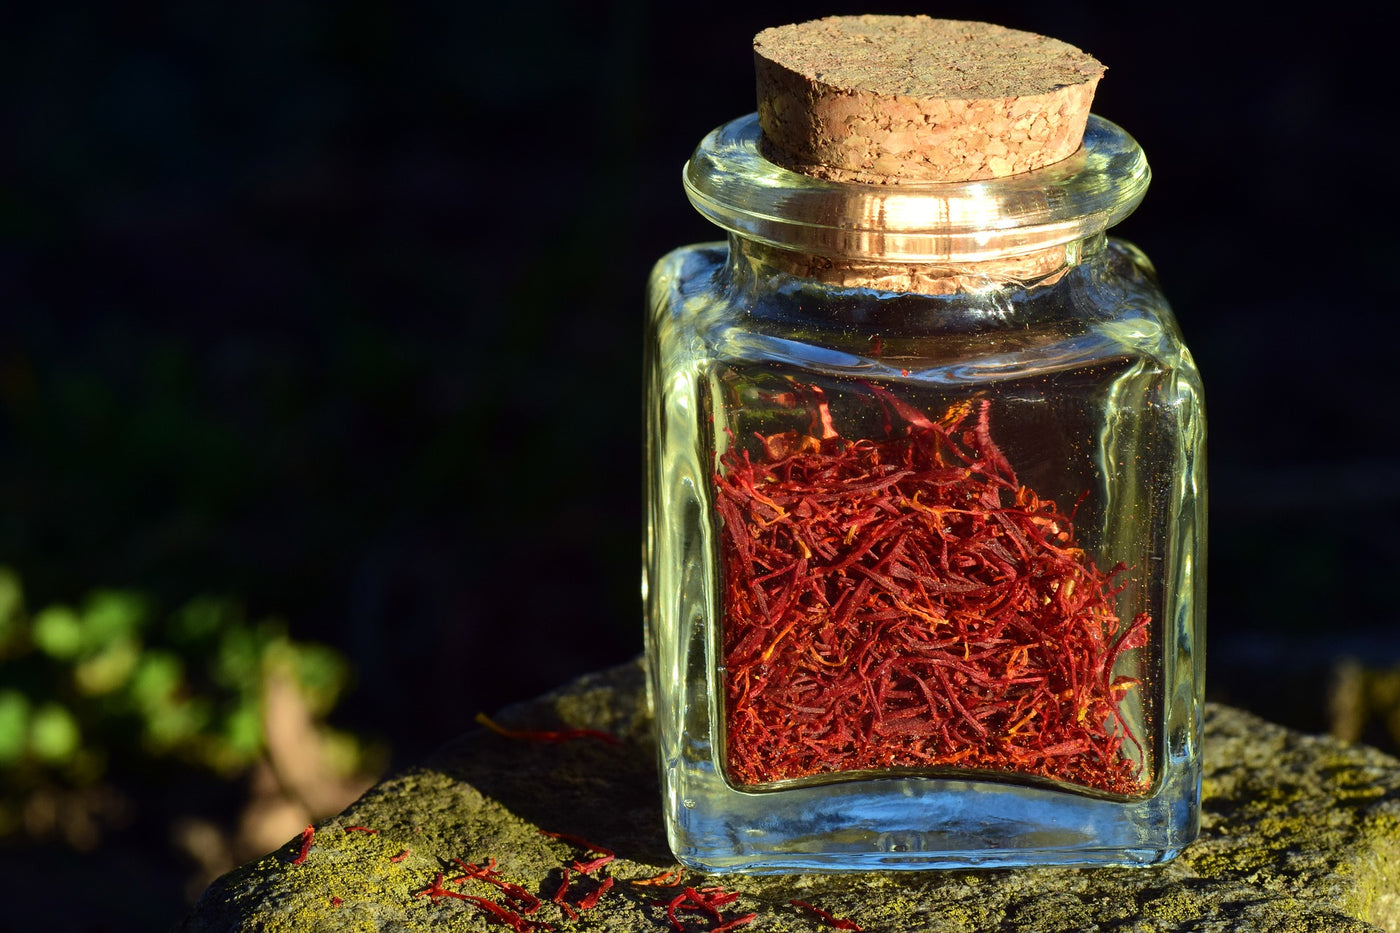 Saffron: A Treat for the Taste Buds, an Even Better One for the Mind